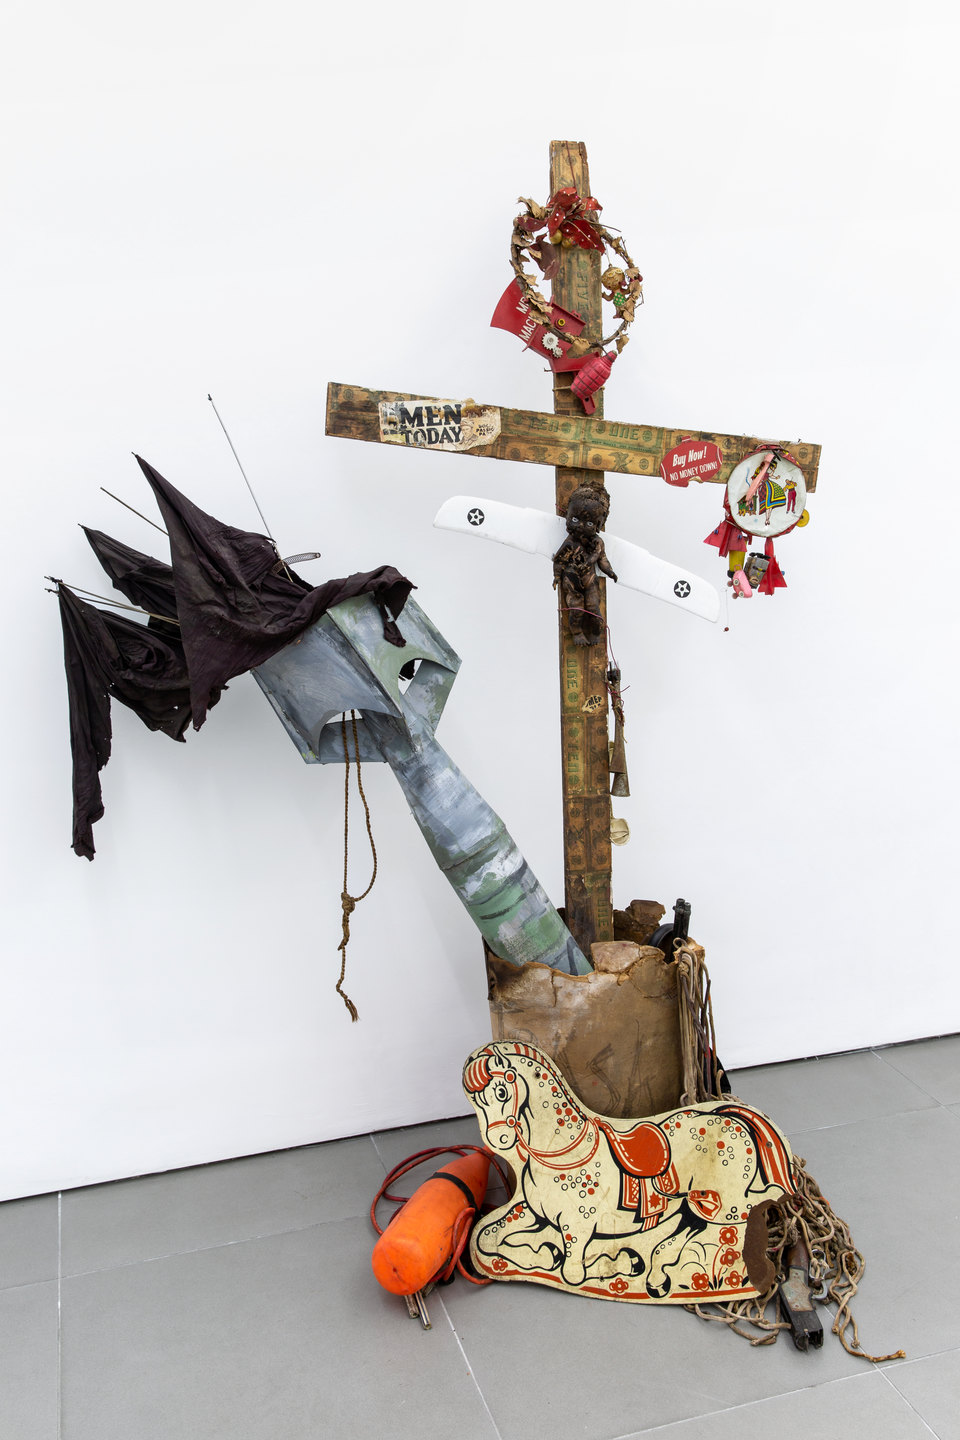 Sam Goodman, 'The Bomb', 1960–61, Found Object Assemblage, 193 x 121 x 58cm, Shit and Doom - NO!art, 2019, Cell Project Space